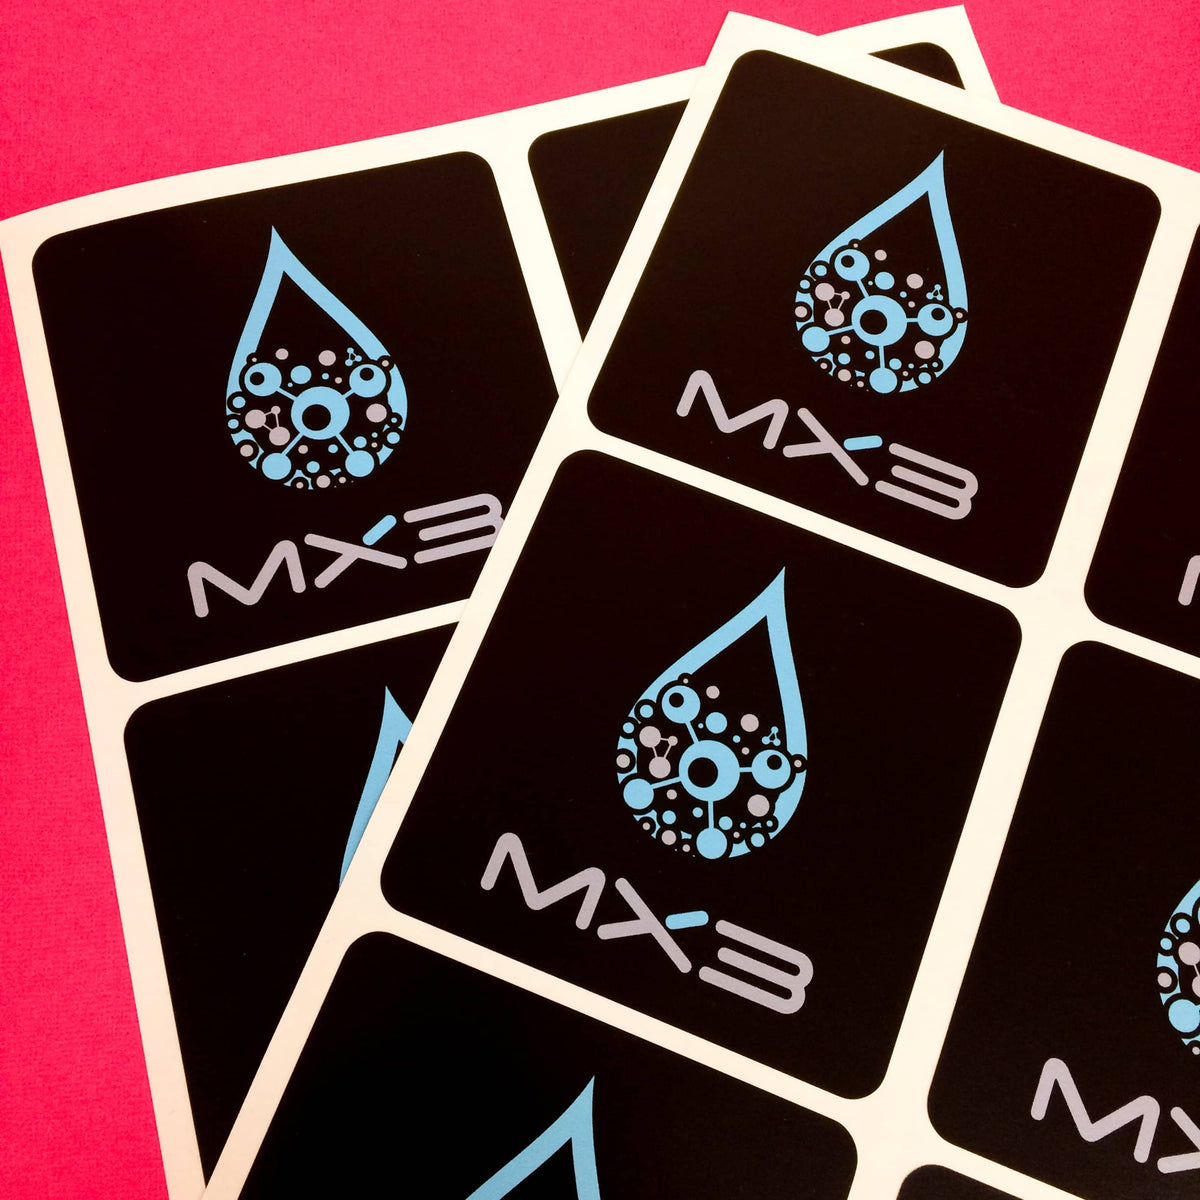 MX3 logo with black background square sheet label stickers.